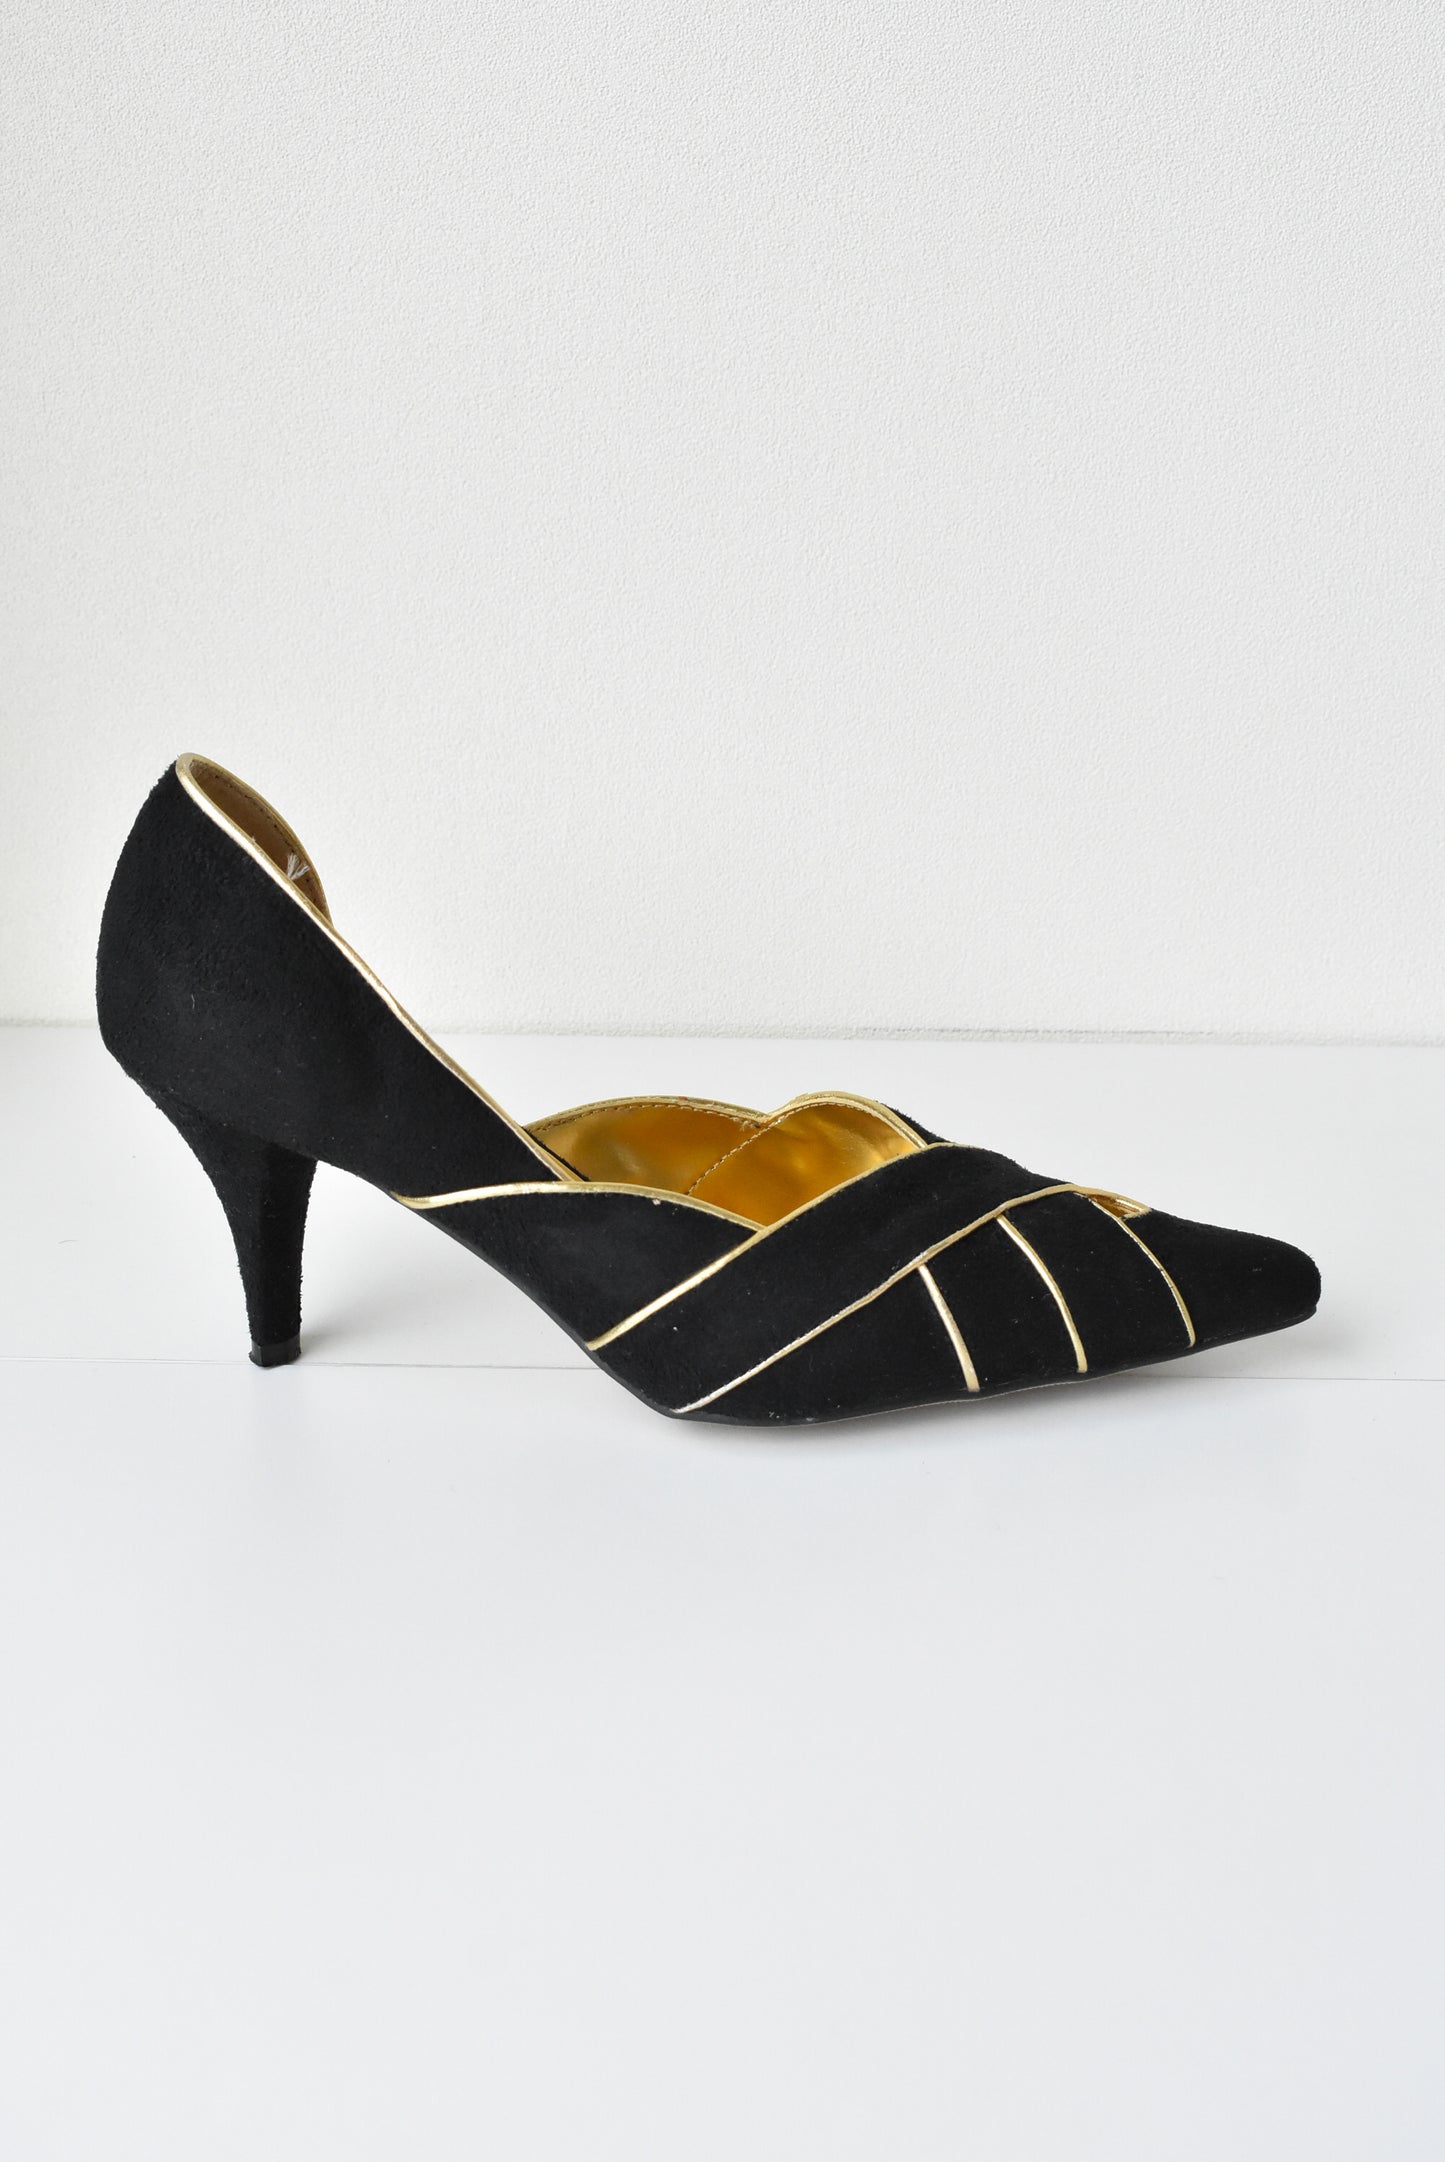 Wild Rose black and gold suede heels, size 8